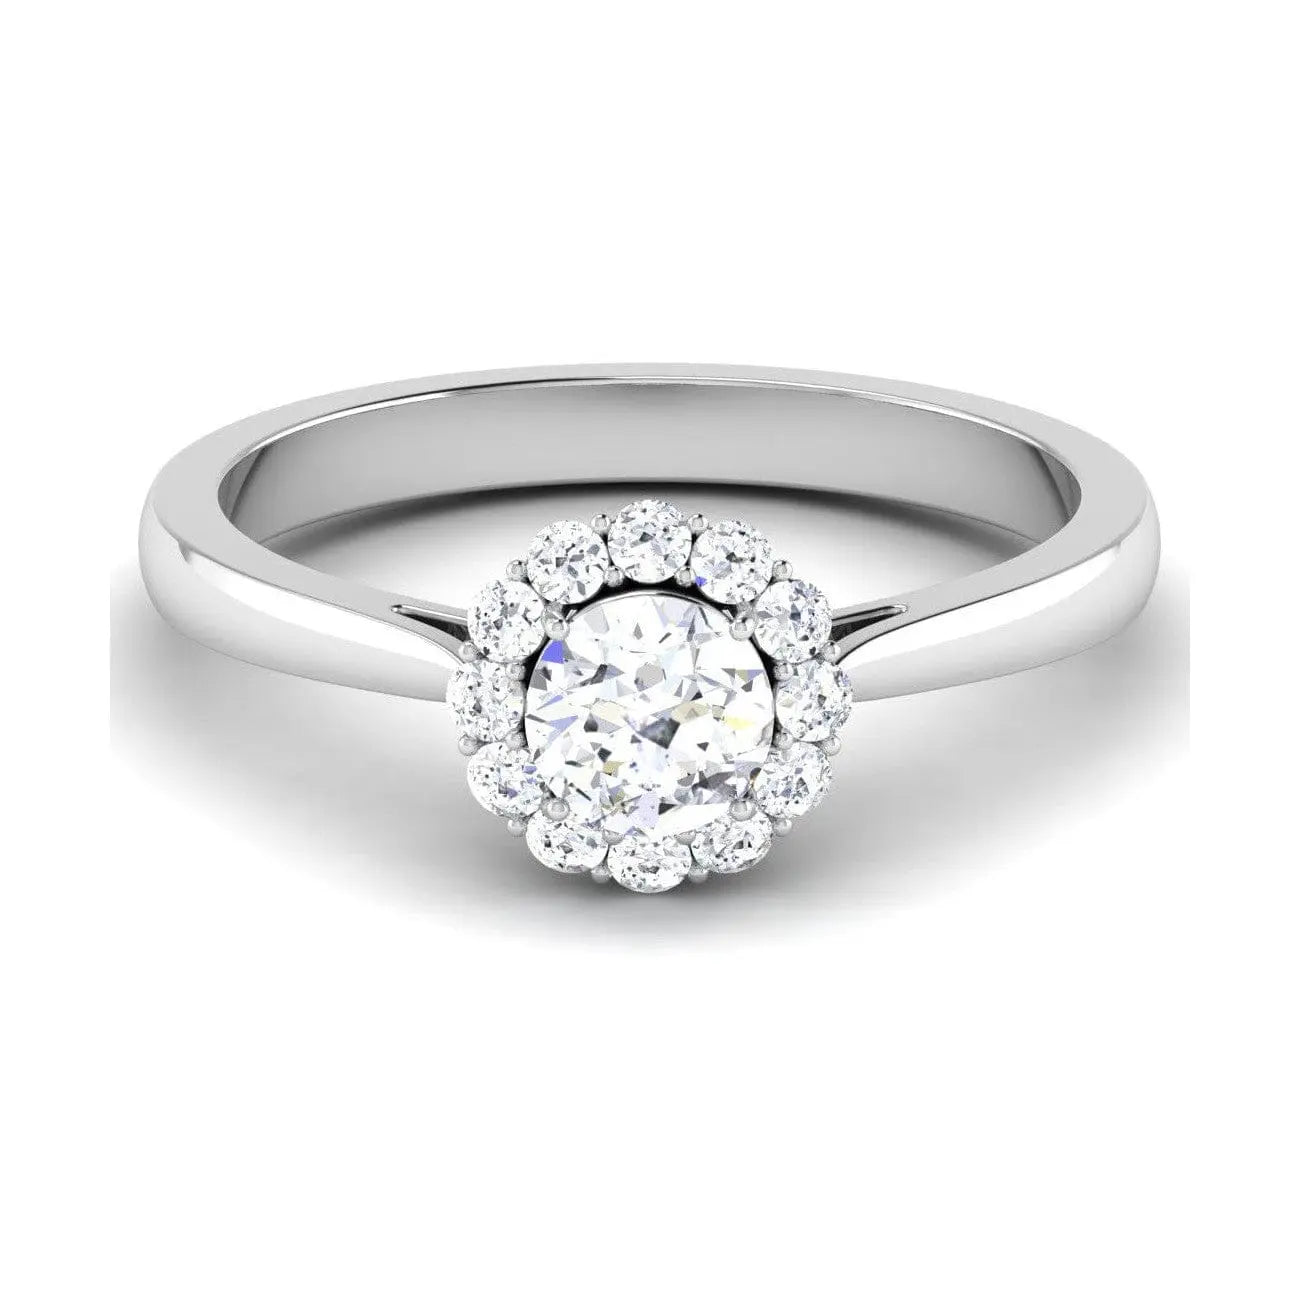 Get the Perfect Green Diamond Engagement Rings | GLAMIRA.in